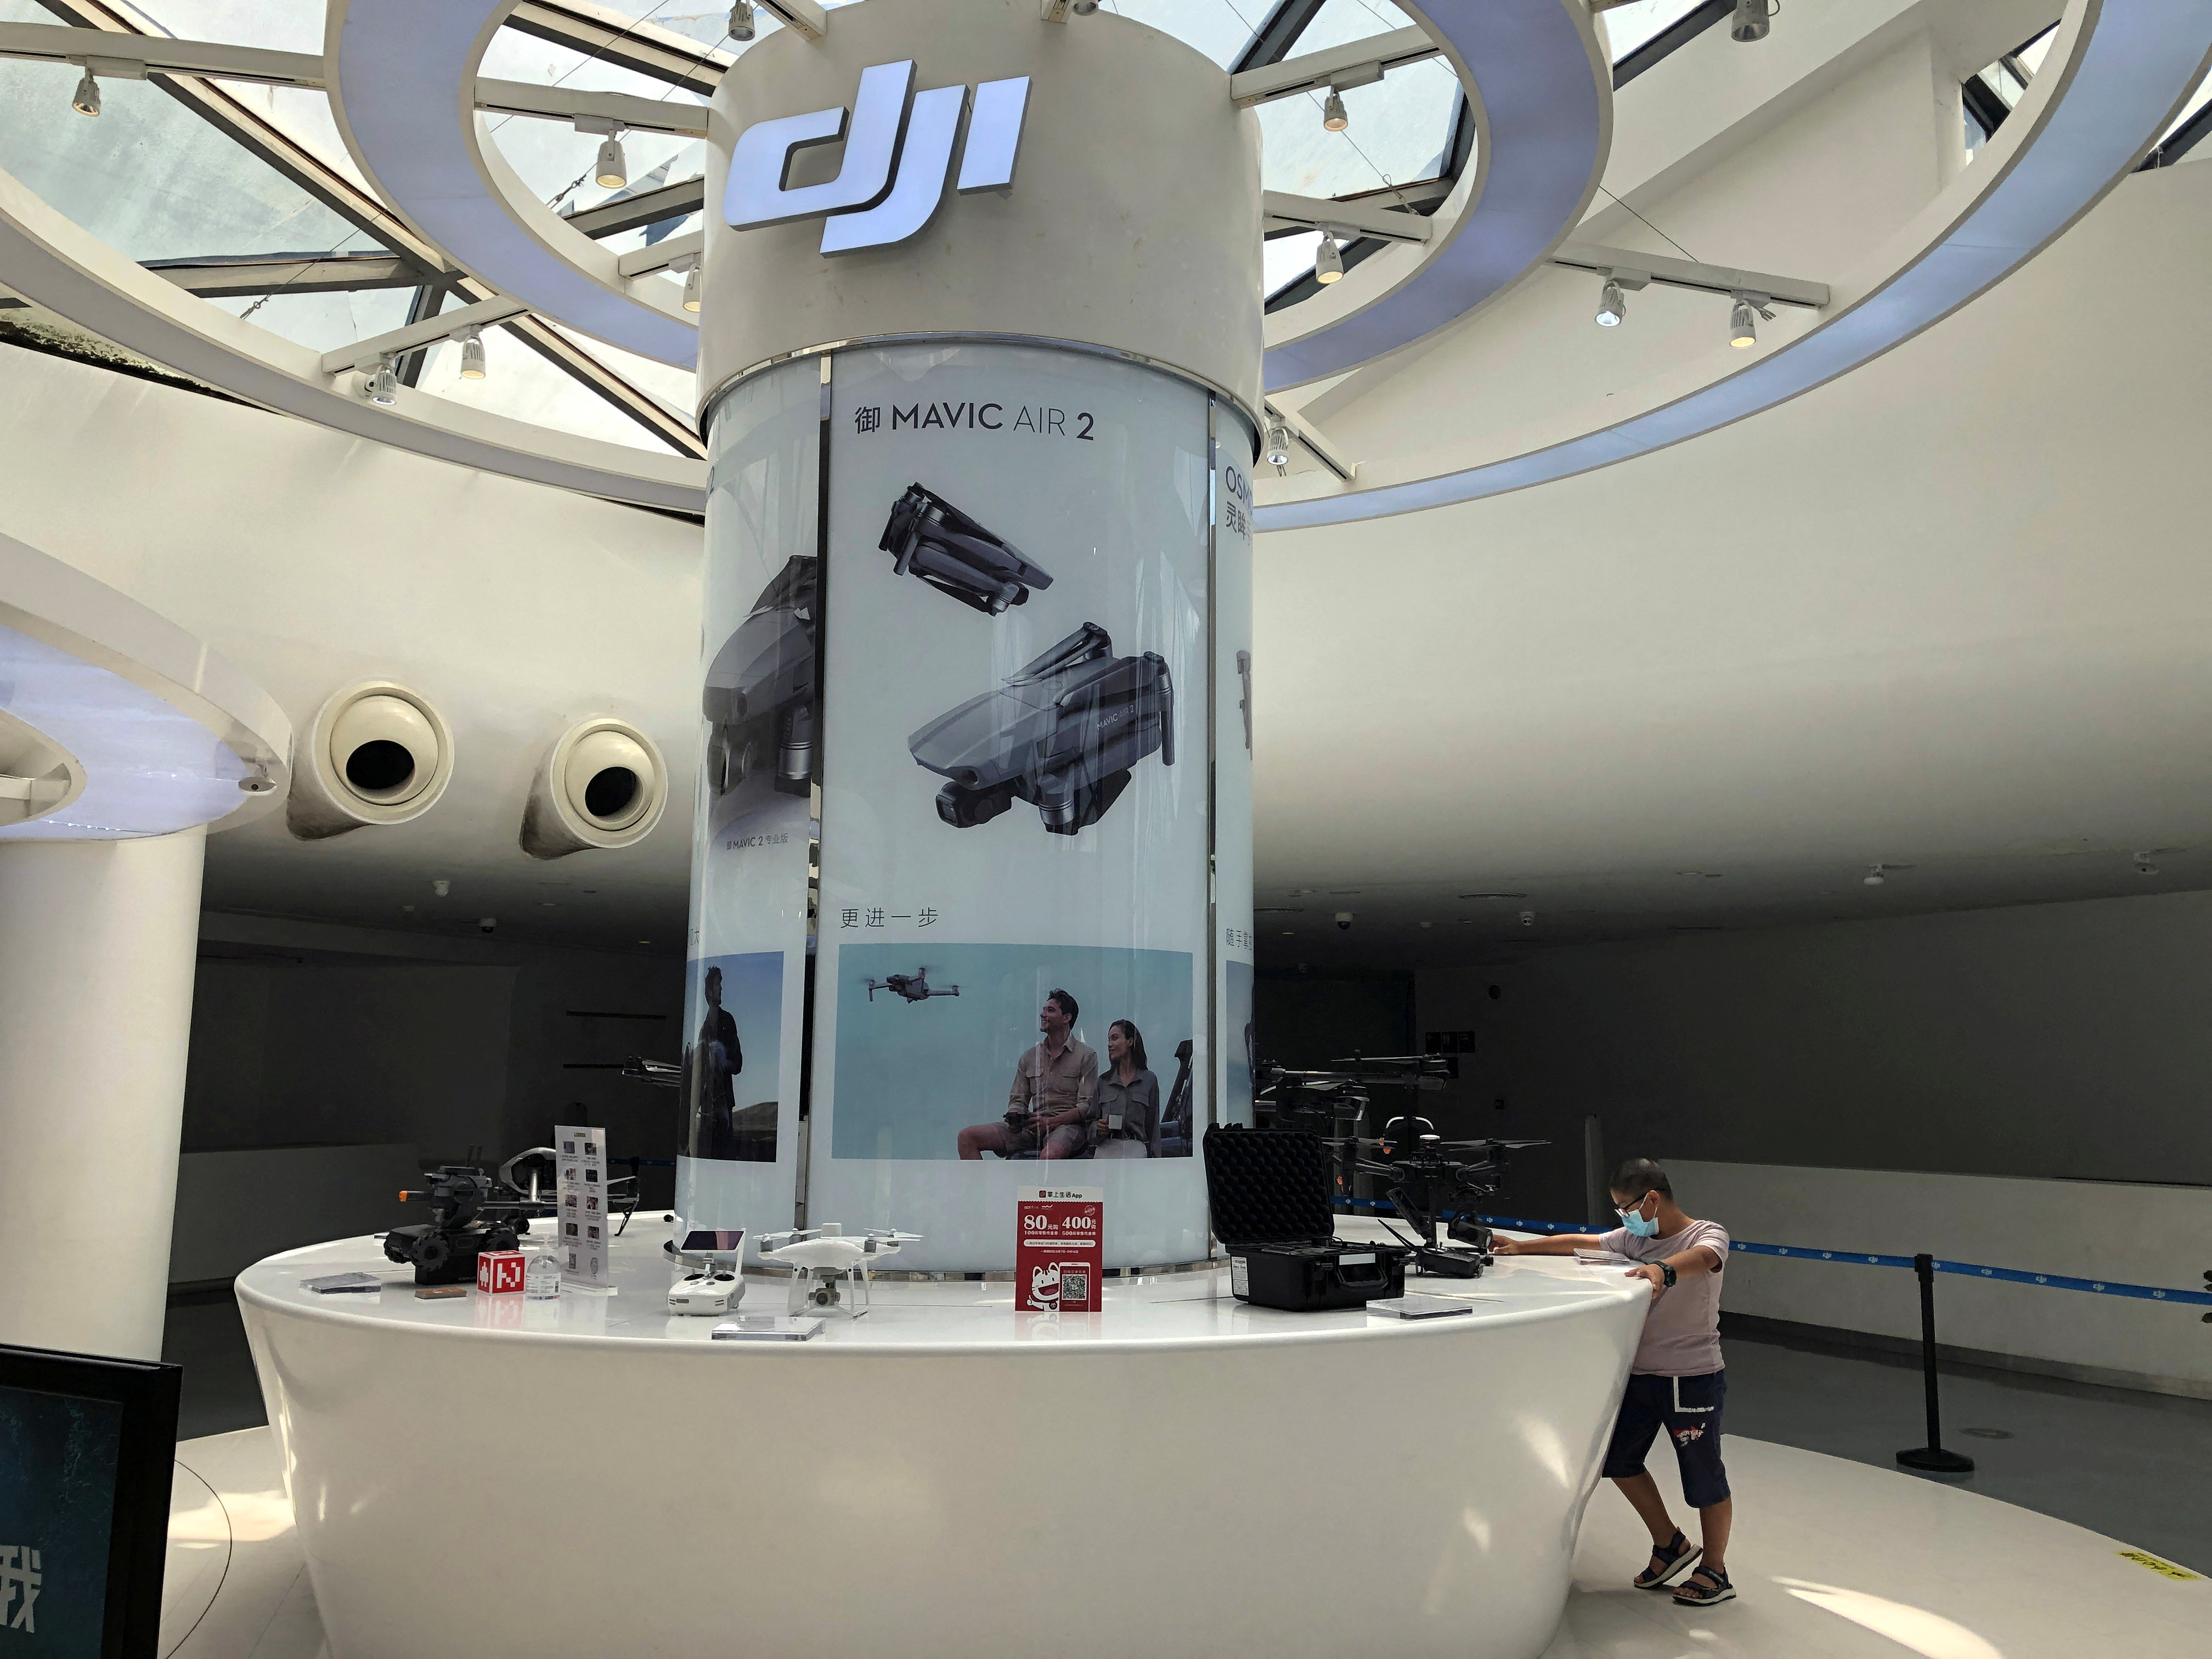 Man wearing a face mask following the coronavirus disease (COVID-19) outbreak is seen at a counter displaying drones and other products at DJI's flagship store in Shenzhen